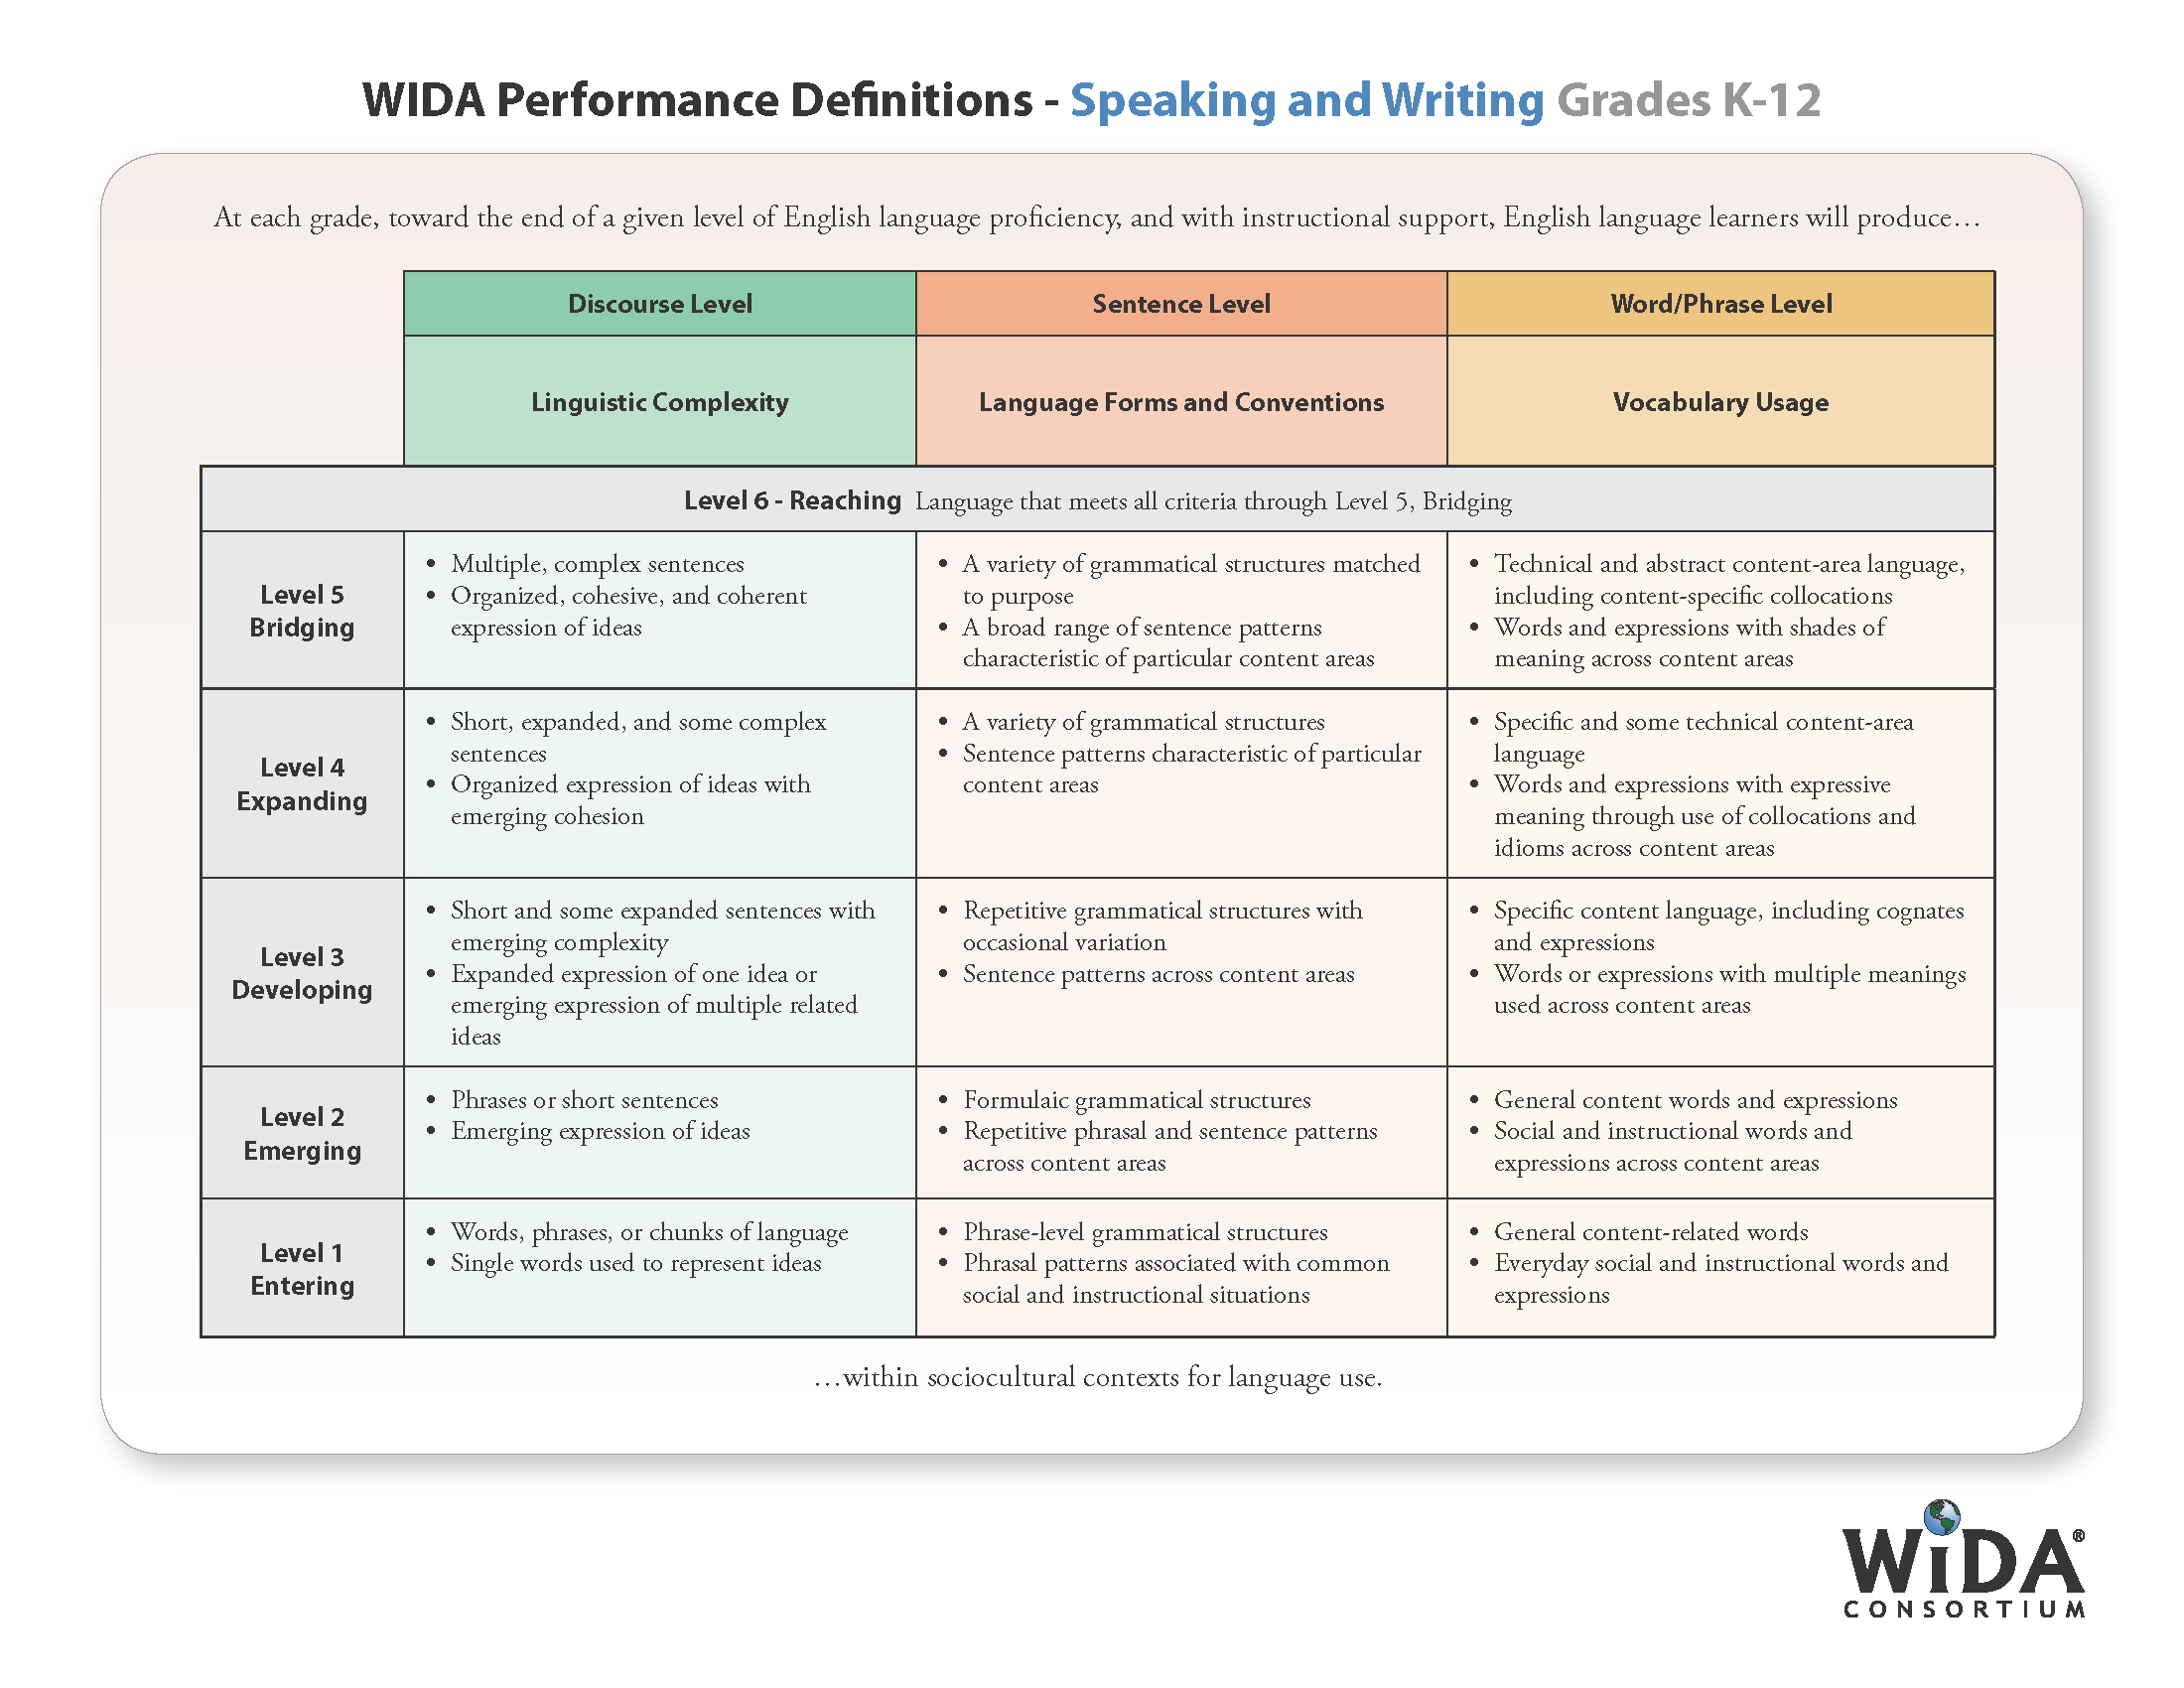 WIDA Performance Definitions - Speaking and Writing Grades K-12